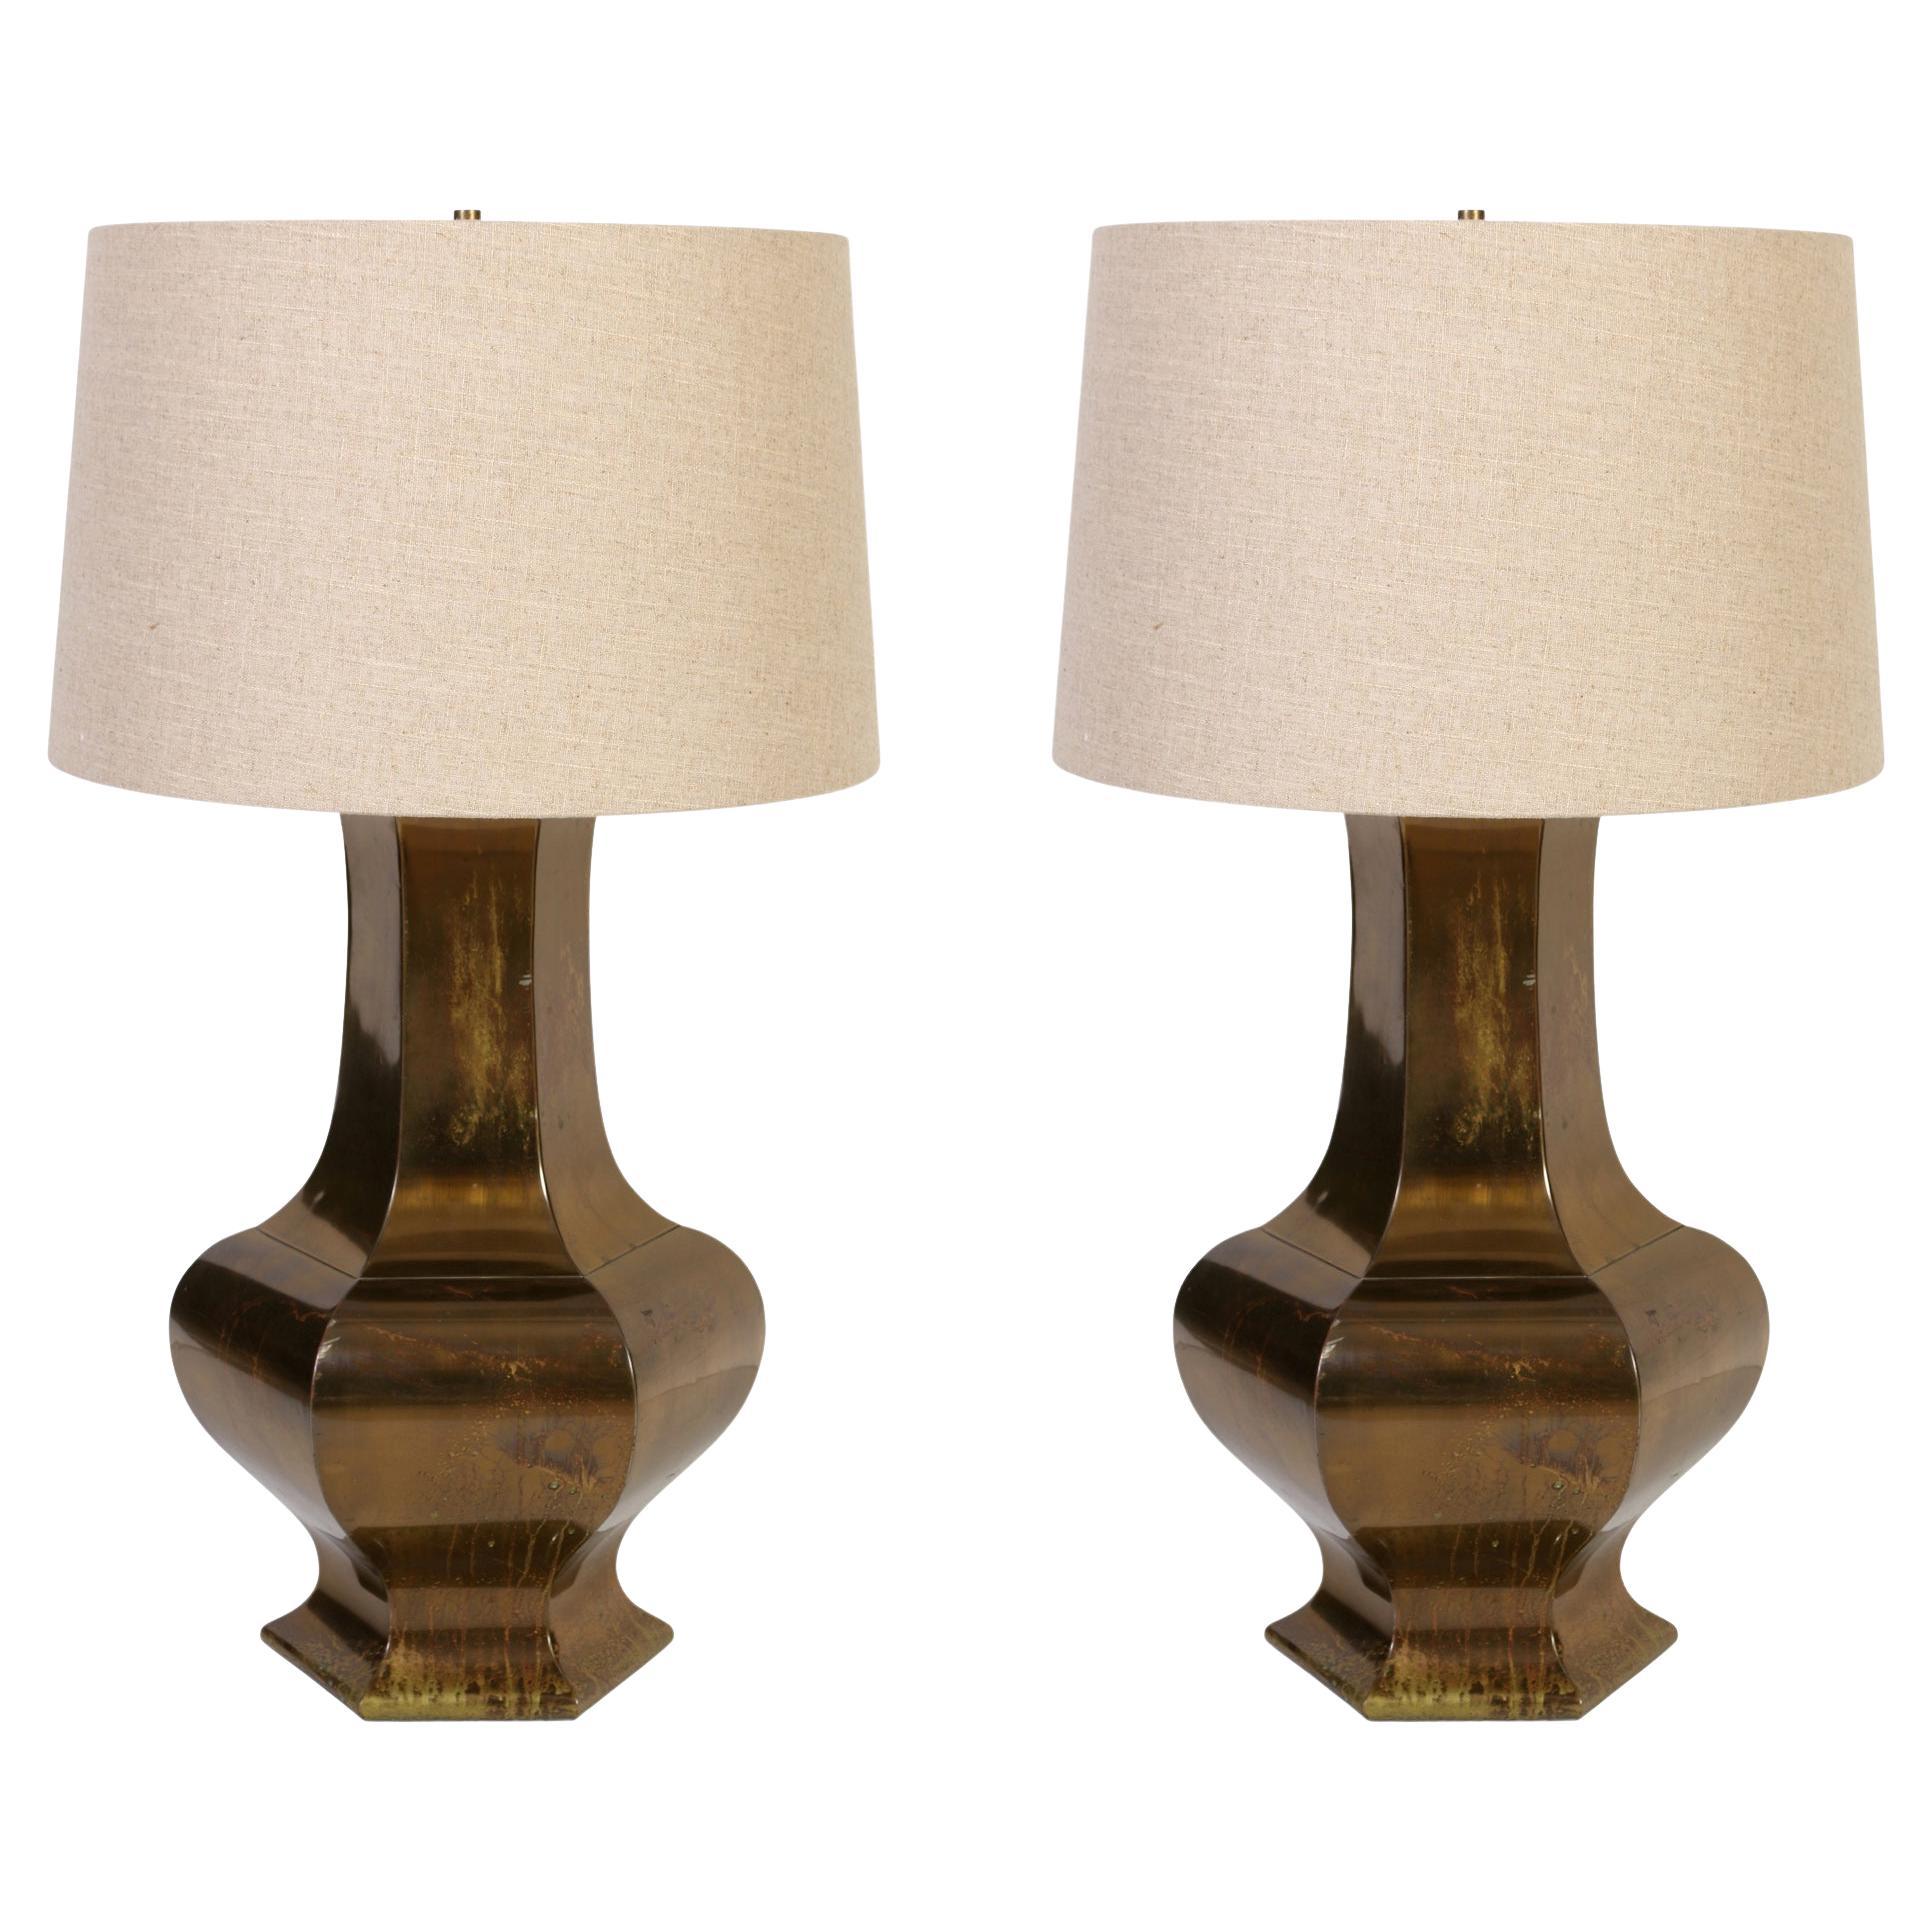 Pair of Vintage Brass Hexagonal Lamps For Sale